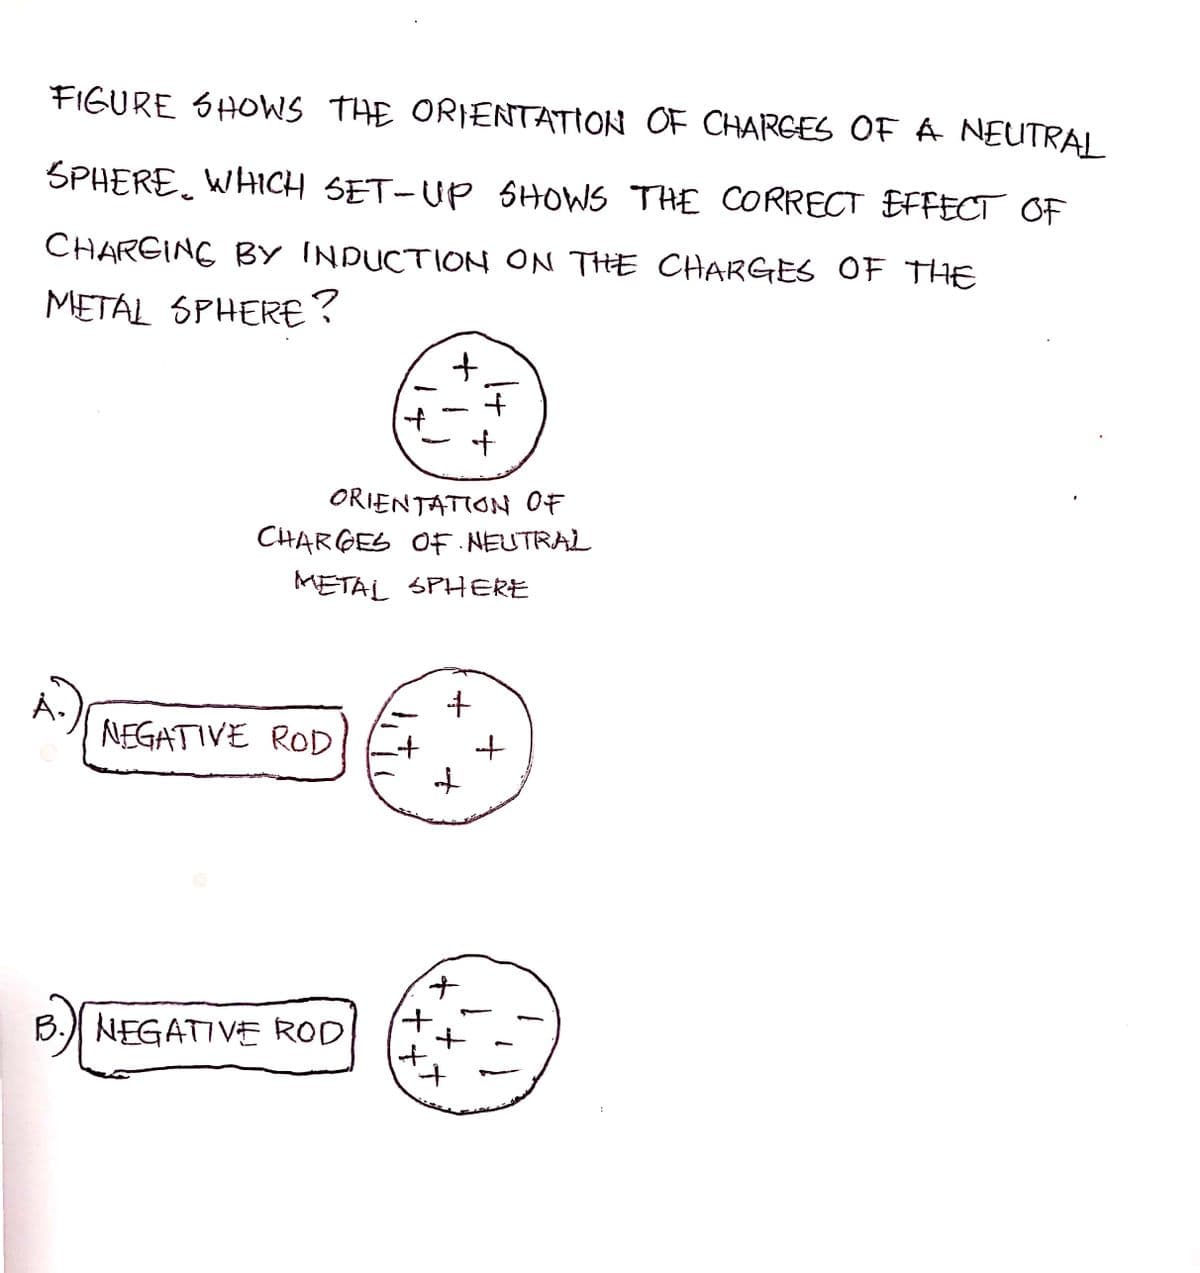 FIGURE SHOWS THE ORIENTATION OF CHARGES OF A NEUTRAL
SPHERE, WHICH SET-UP SHOWS THE CORRECT EFFECT OF
CHARGING BY INDUCTION ON THE CHARGES OF THE
METAL SPHERE?
NEGATIVE ROD
B.) NEGATIVE ROD
ORIENTATION OF
CHARGES OF. NEUTRAL
METAL SPHERE
1
+
+
+
++
+
t
+
+
14
+
+
: